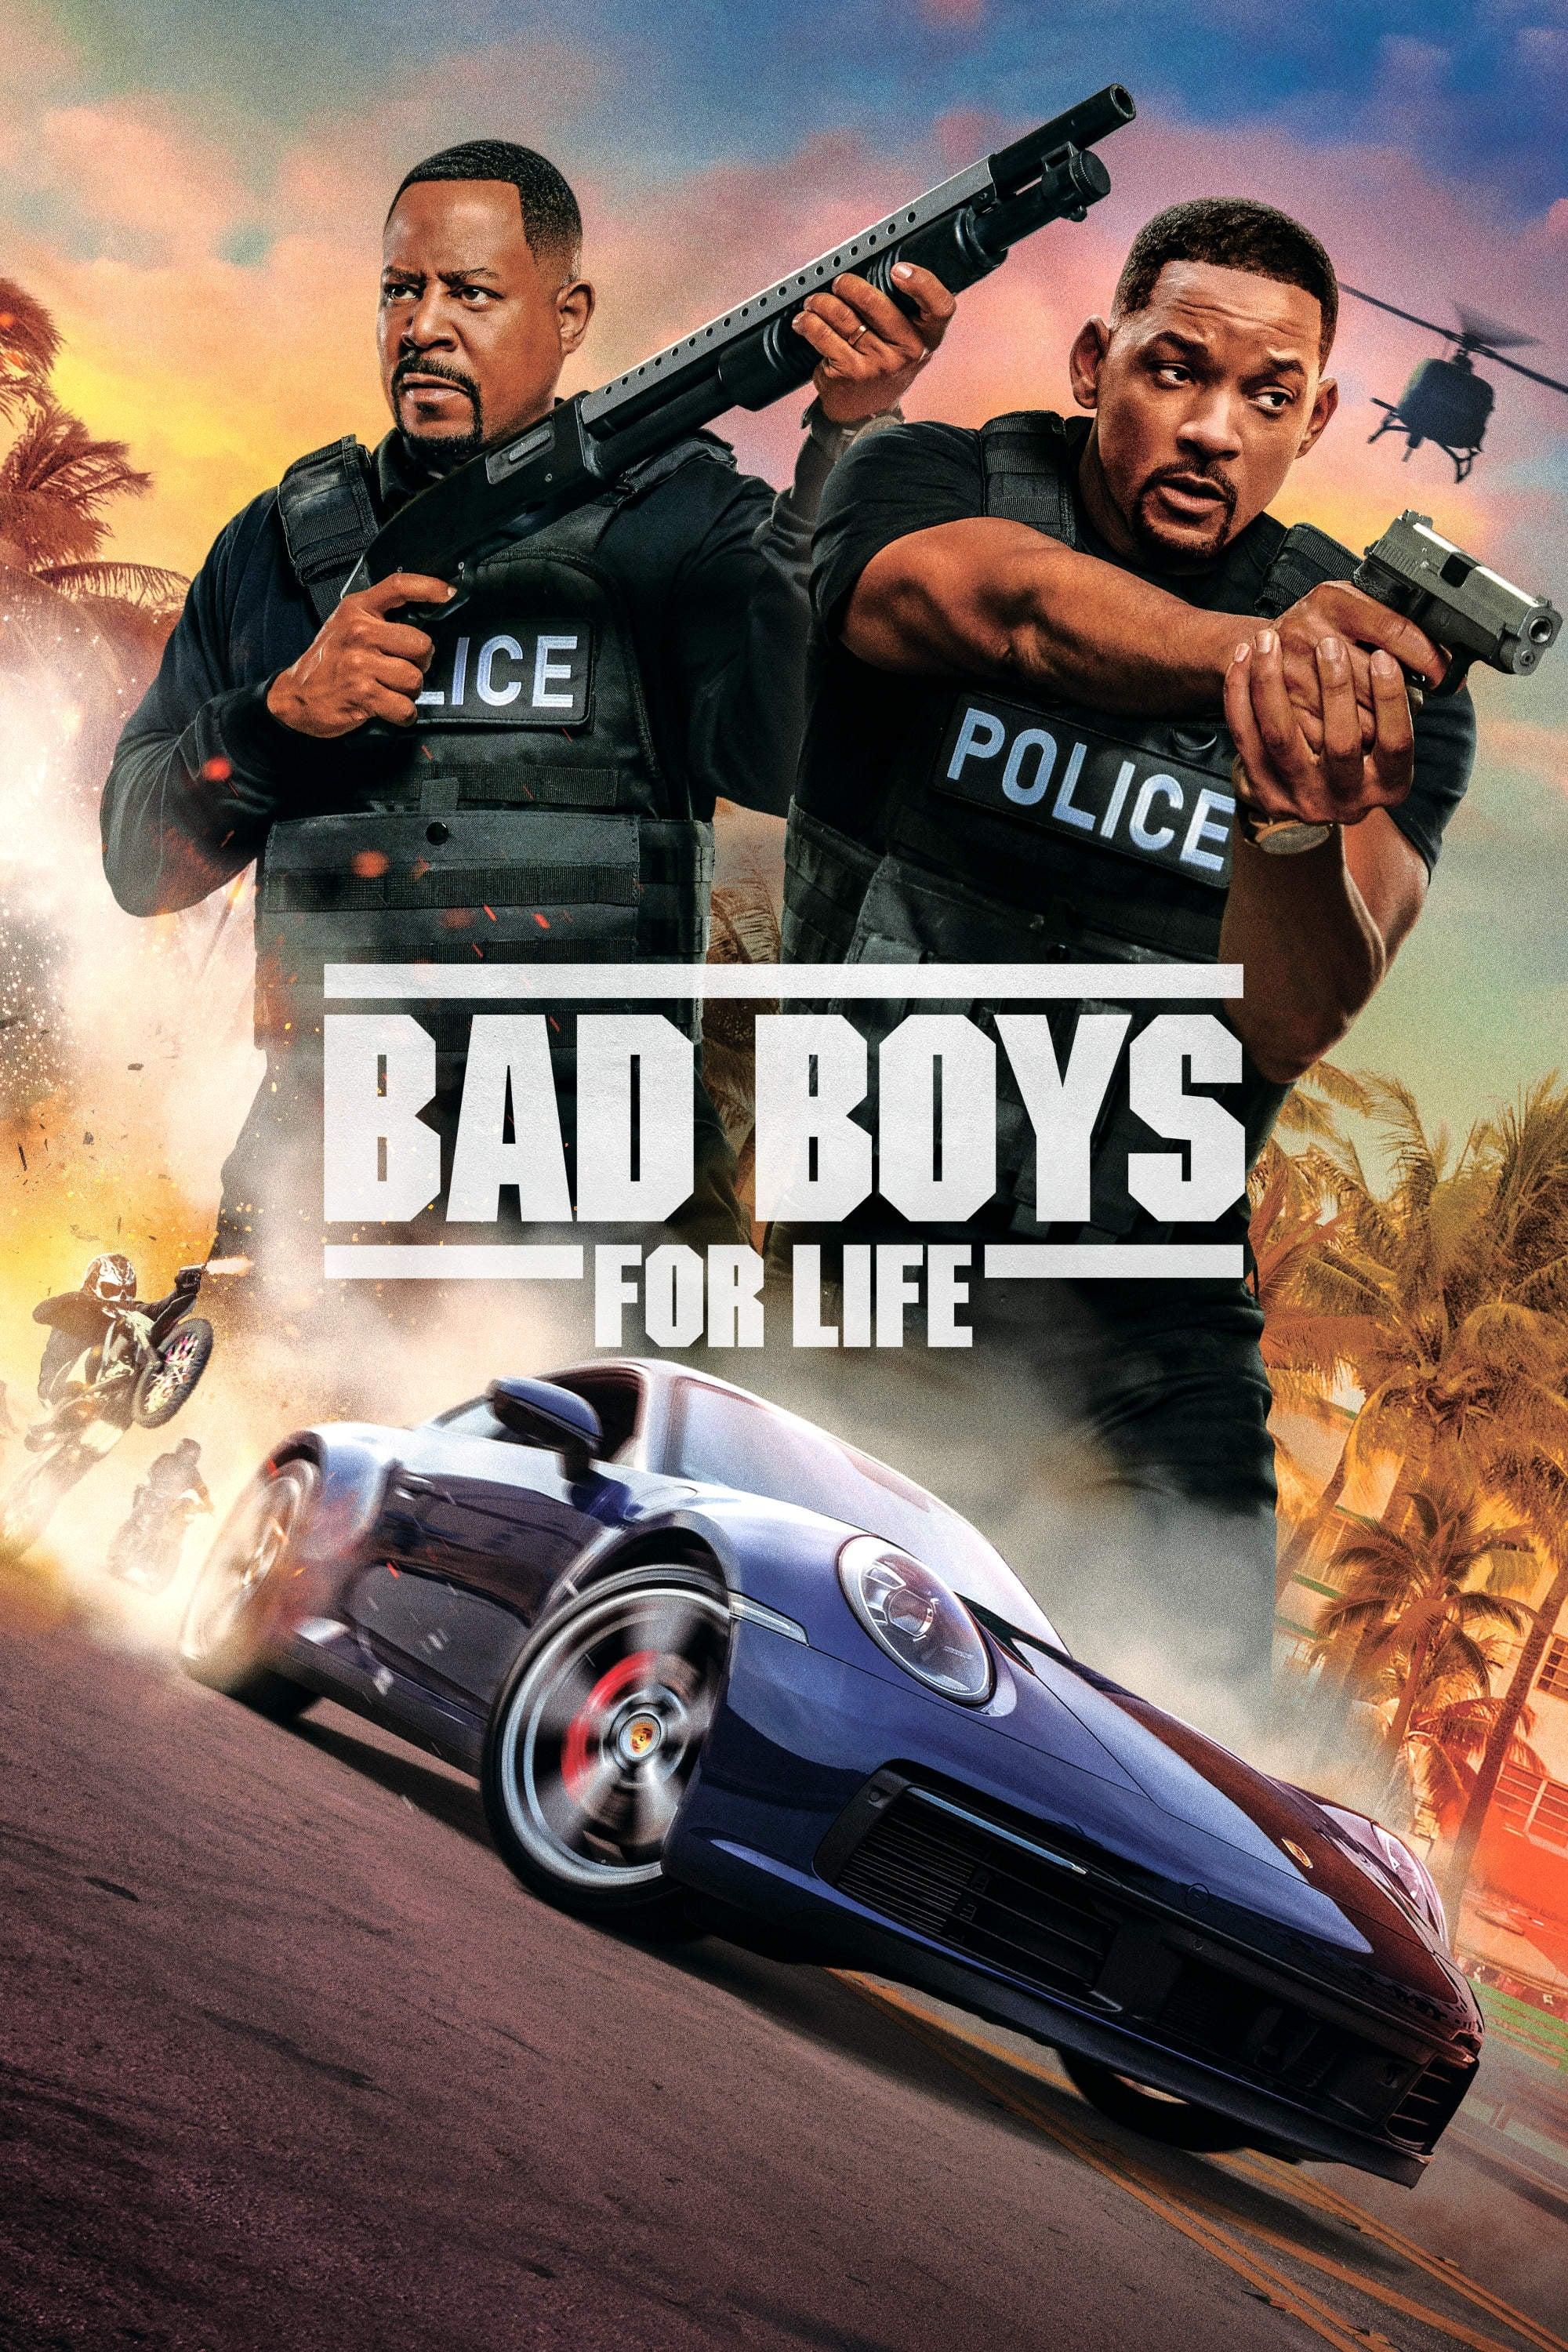 Movie poster of "Bad Boys for Life"